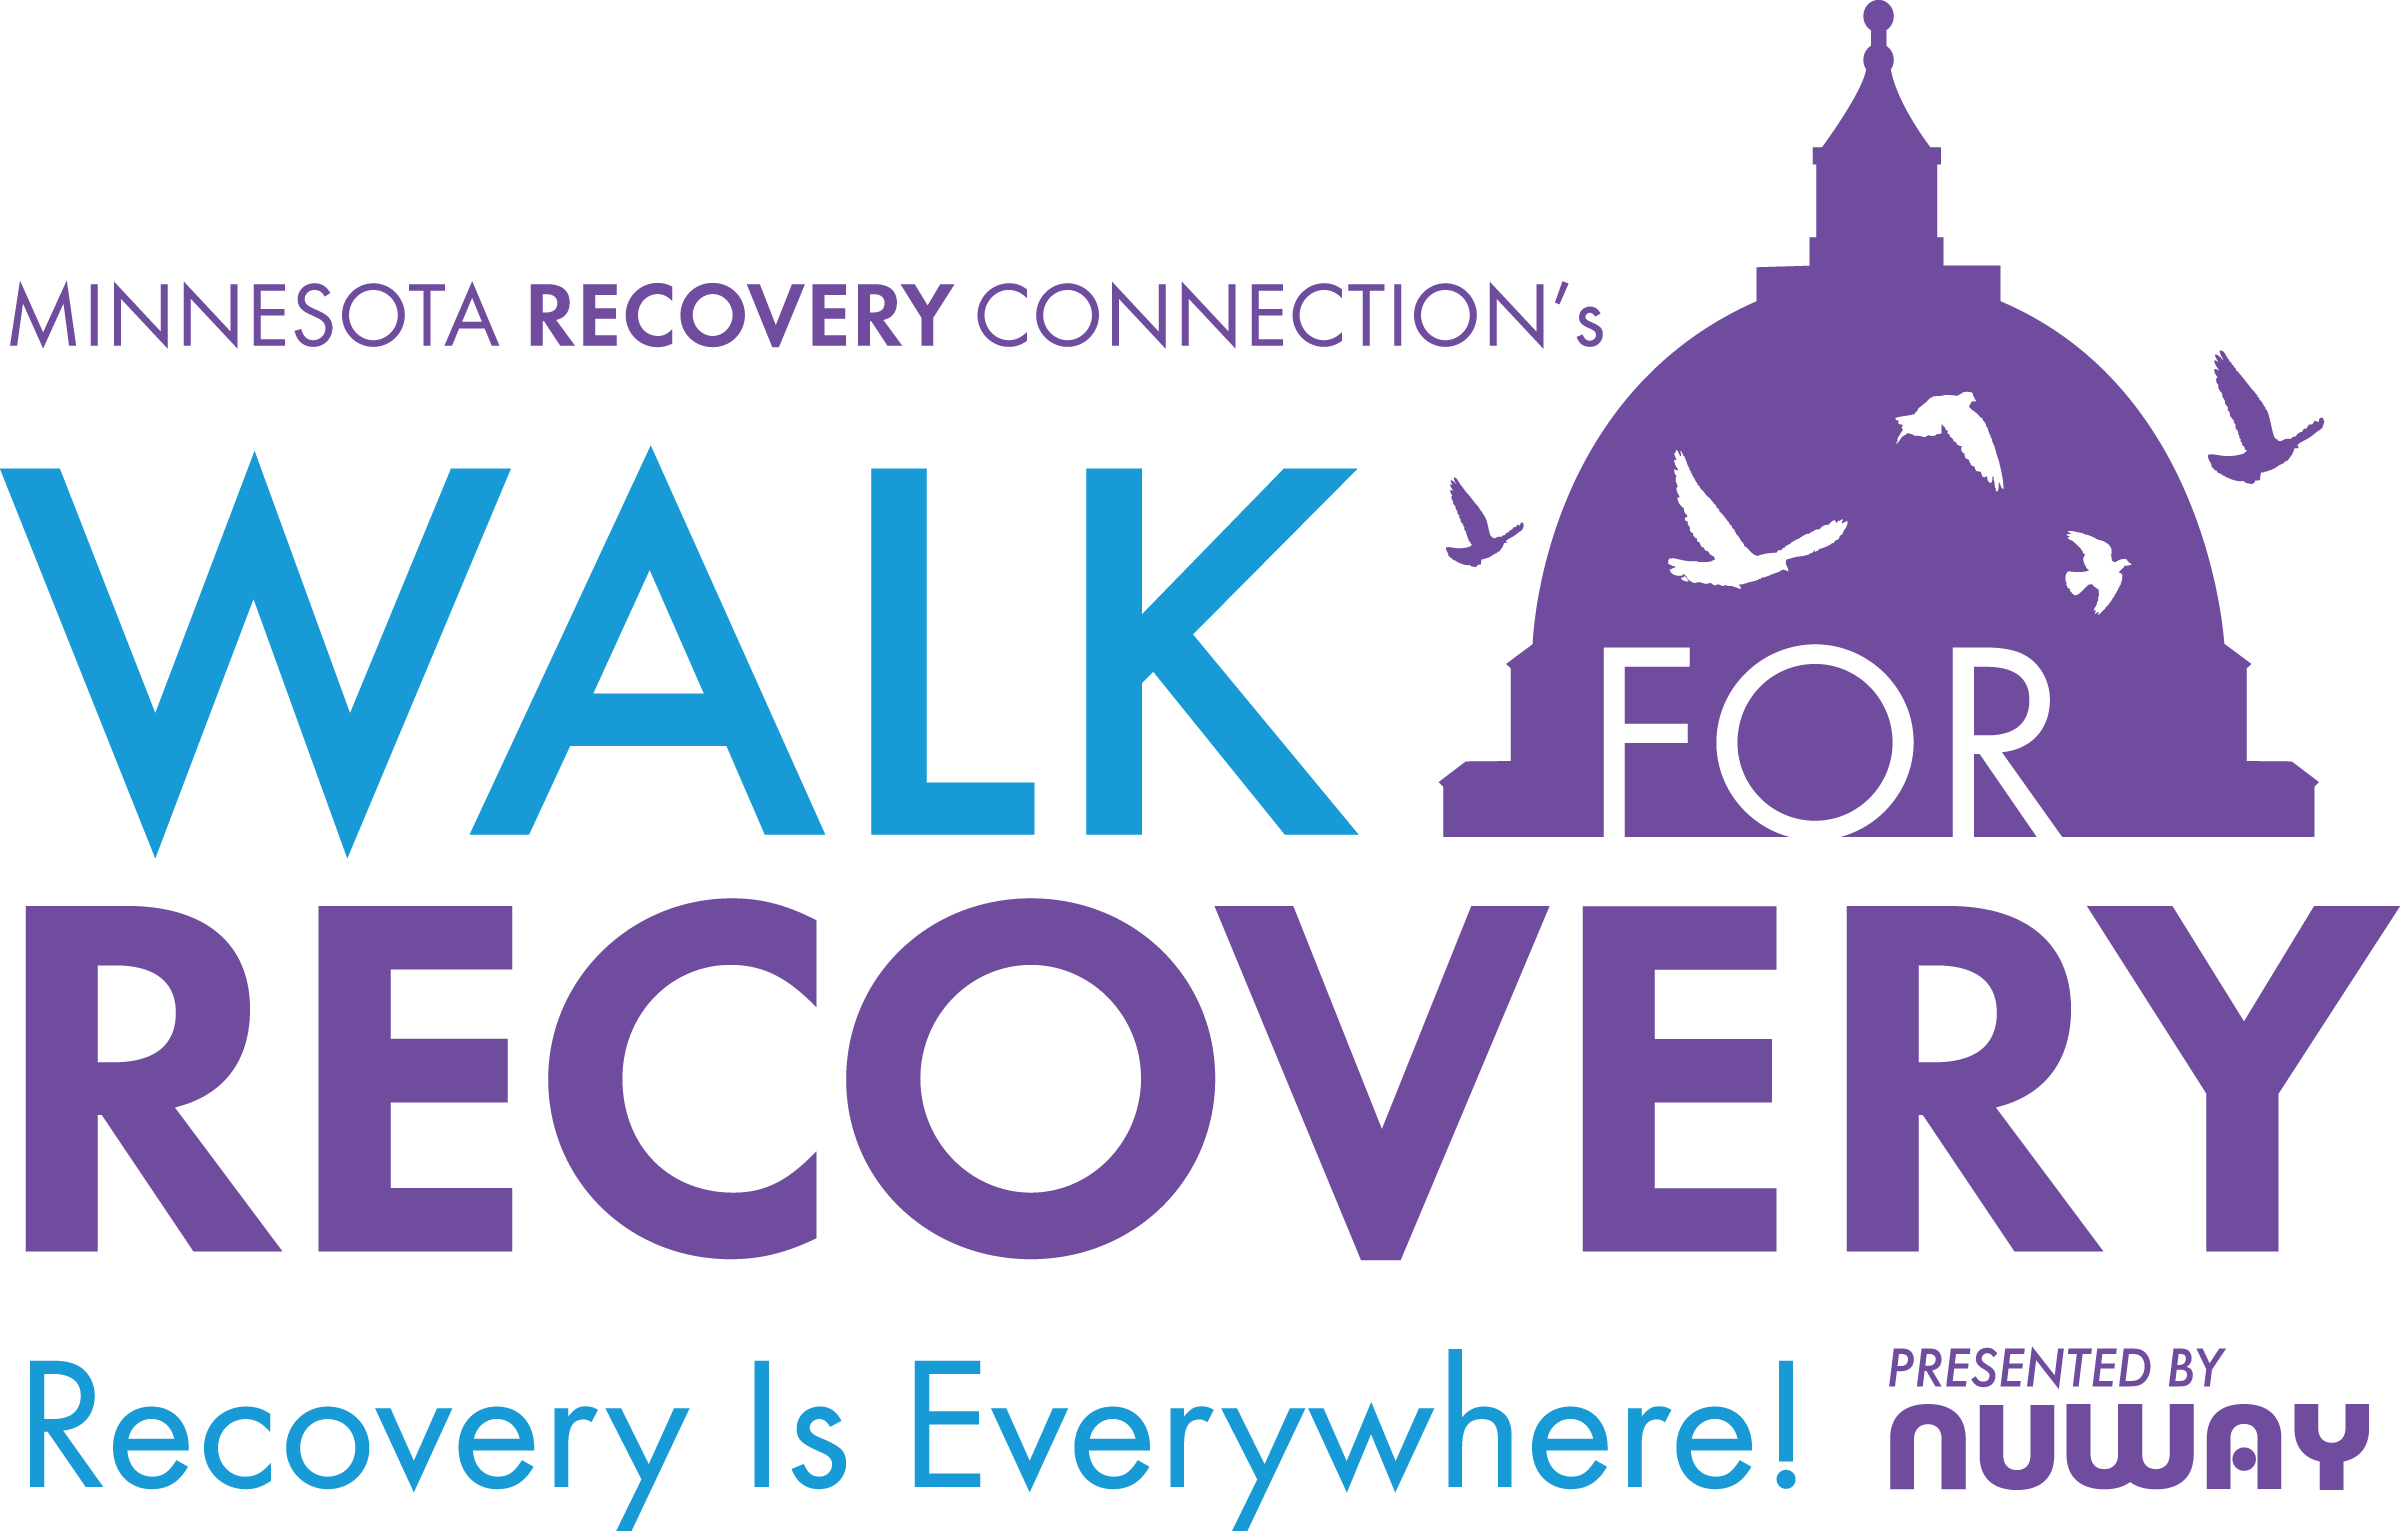 Walk For Recovery Minnesota Recovery Connection